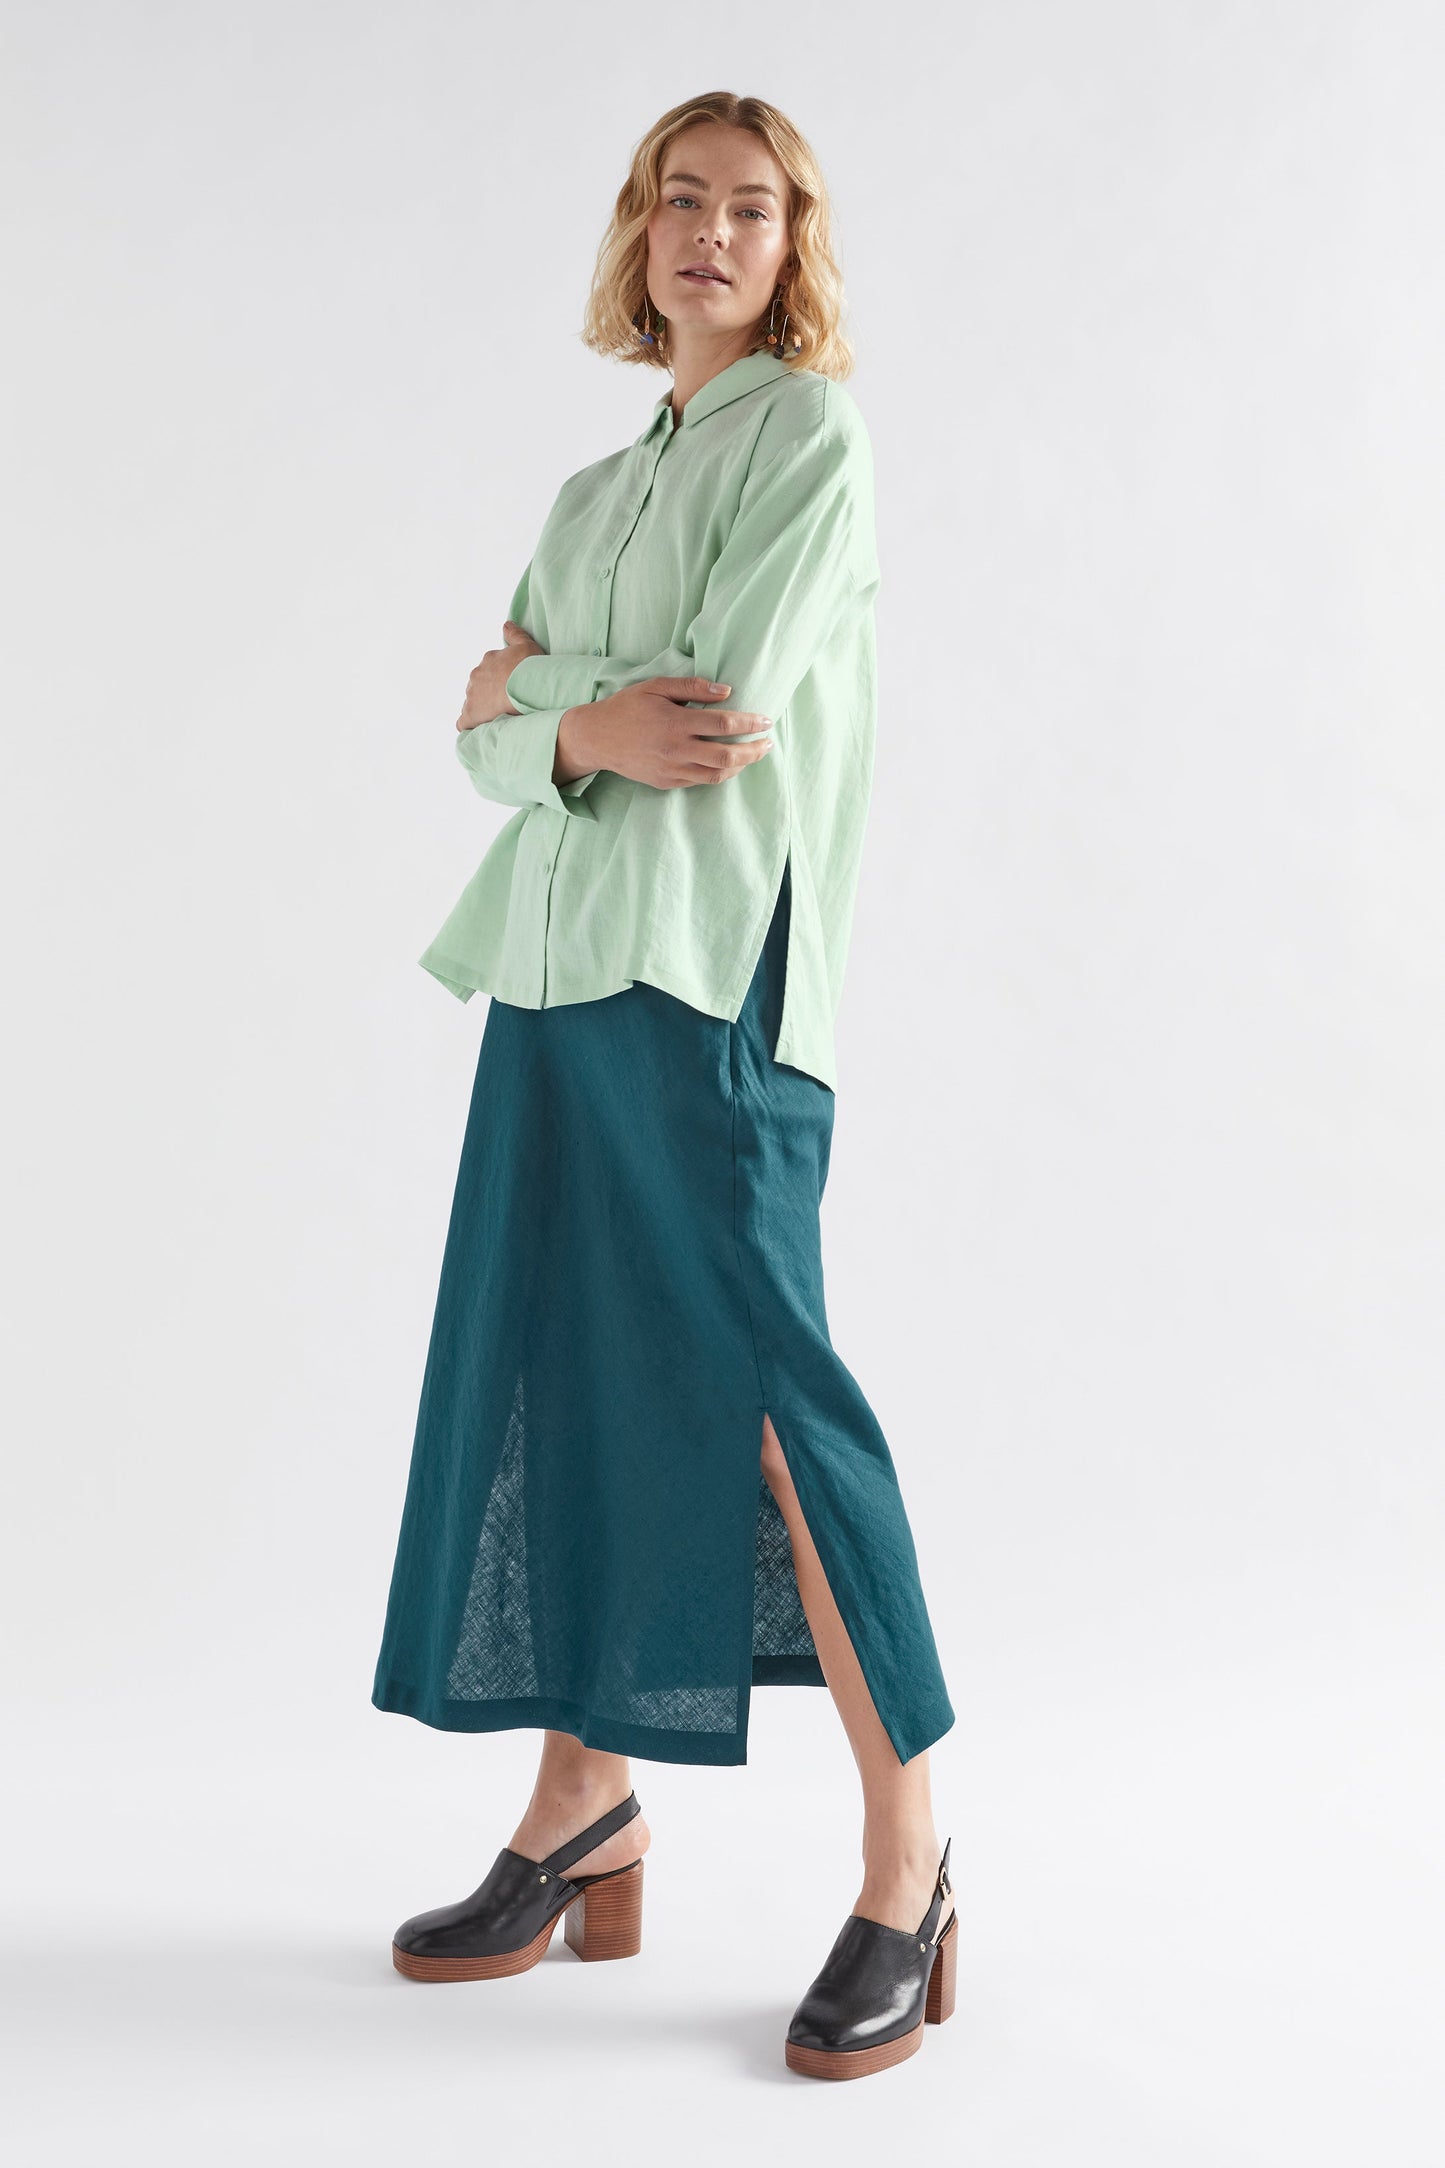 Stilla Linen Shirt with High-Low Hem and Back Pleat Detail Model front full body | MINT